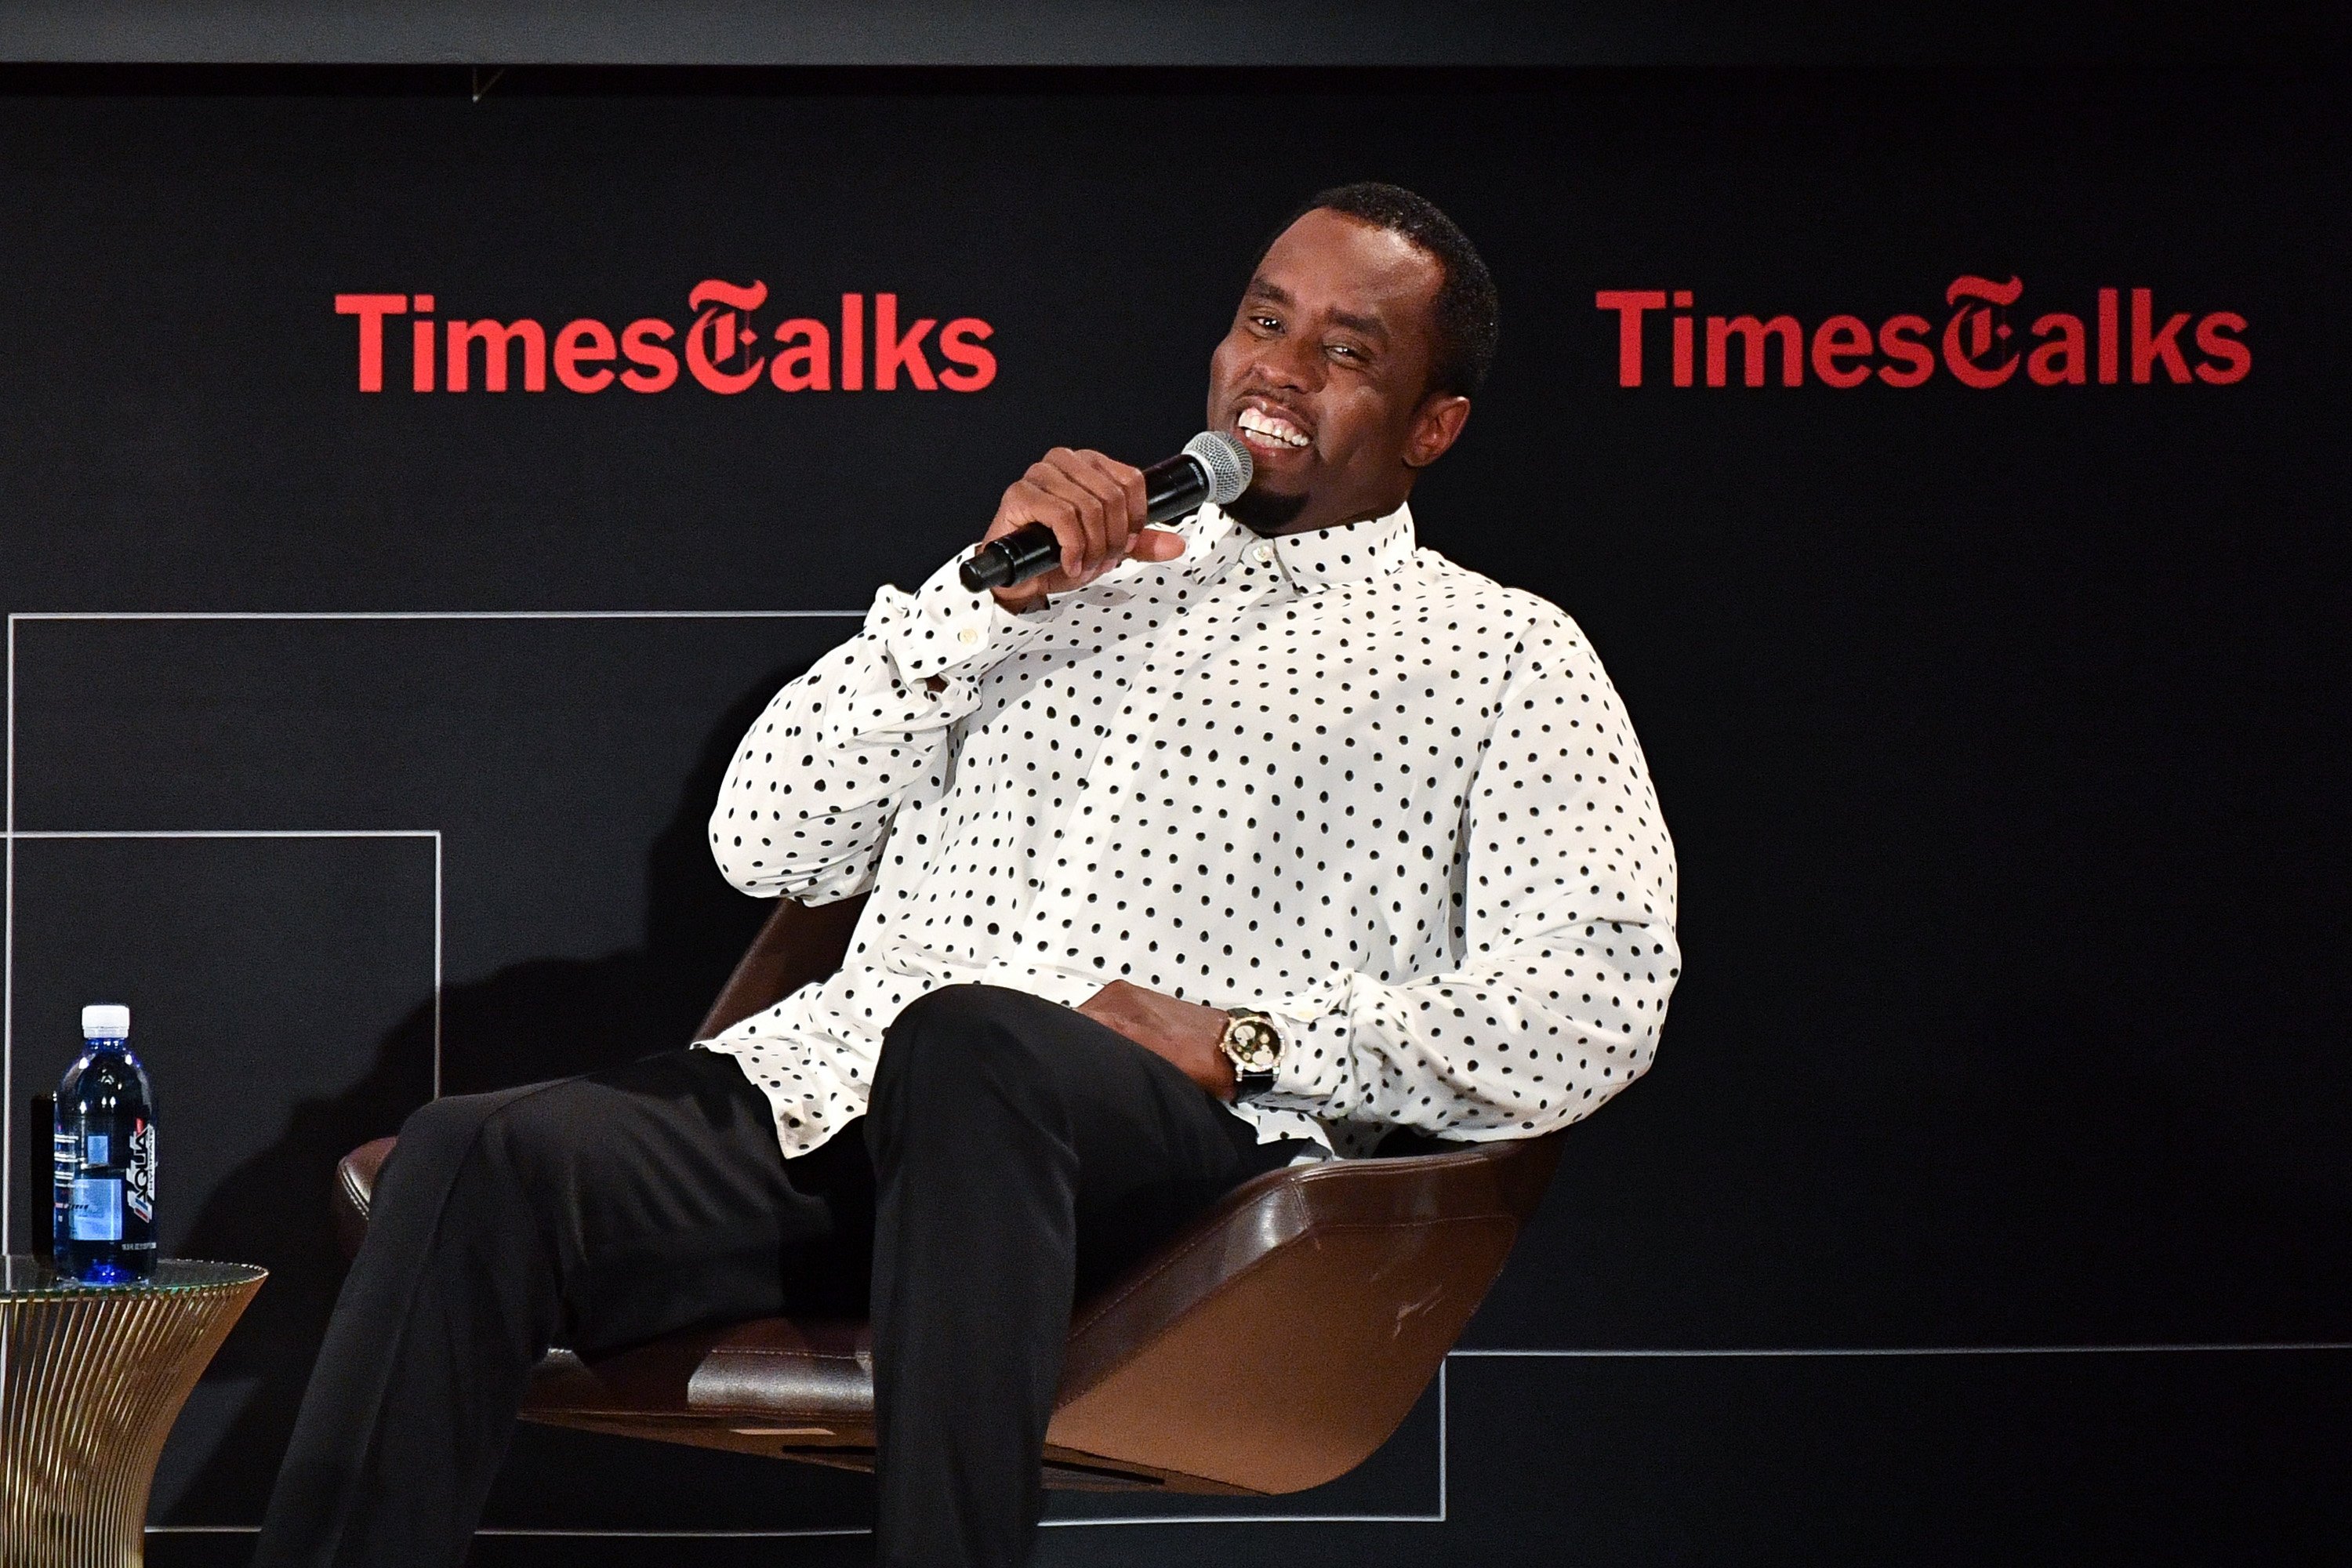 Sean "Diddy" Combs at TimesTalks Presents: An Evening with Sean "Diddy" Combs in New York City on September 20, 2017. | Photo: Getty Images